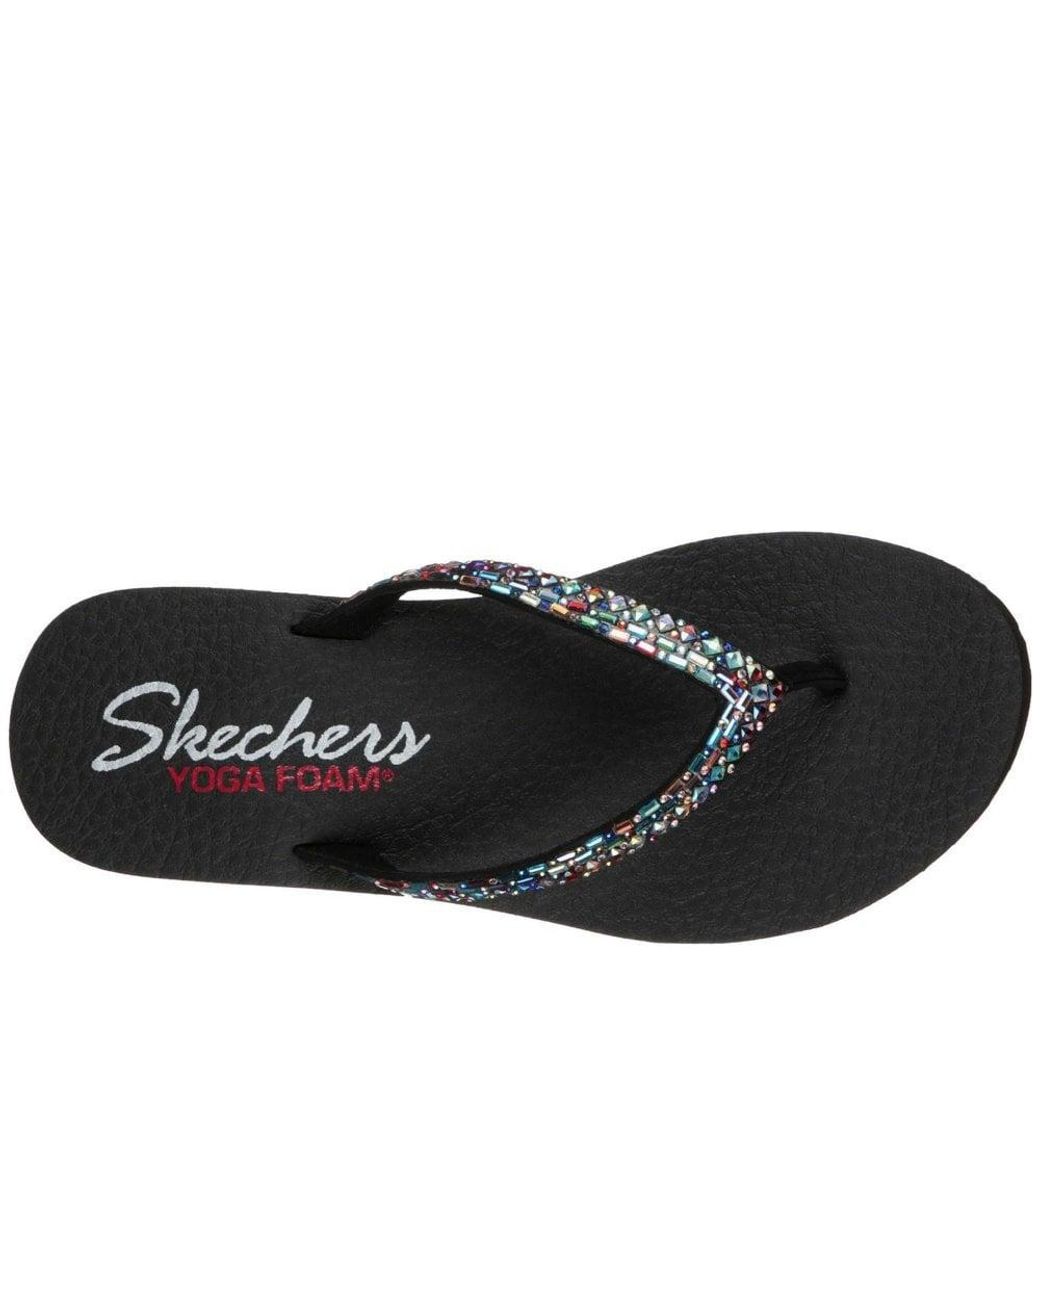 Skechers Synthetic Meditation Shine Away Womens Toe Post Sandals in Black -  Lyst